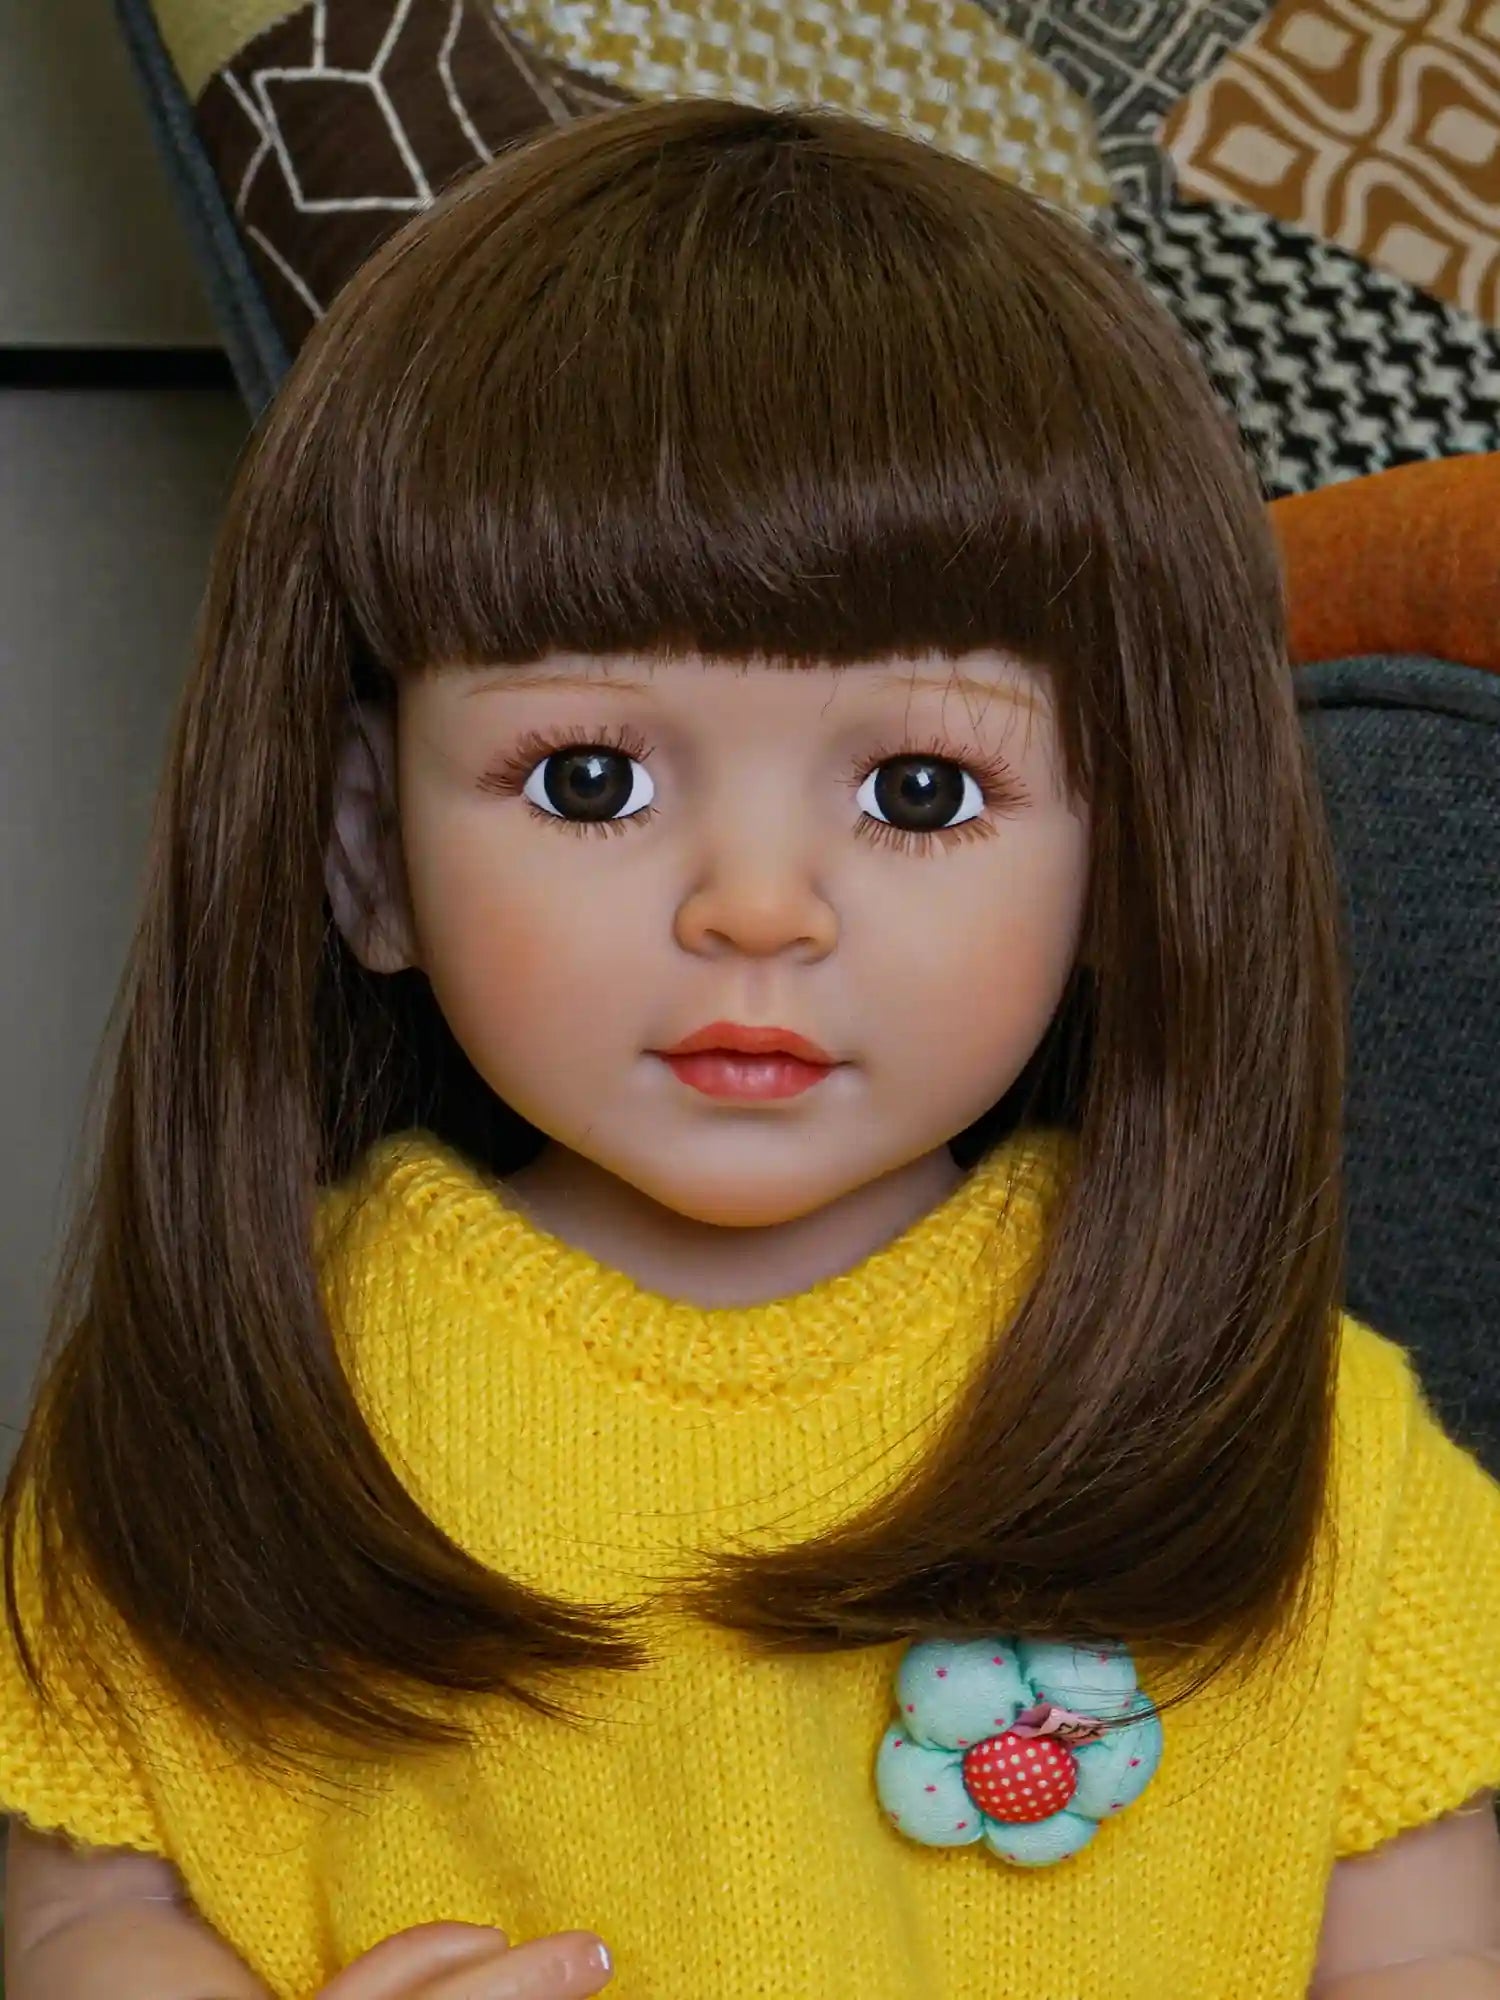 Lifelike reborn doll seated on a pink pouf, with smooth brown hair and expressive eyes, wearing a vibrant yellow knit dress with a playful tulle hem.